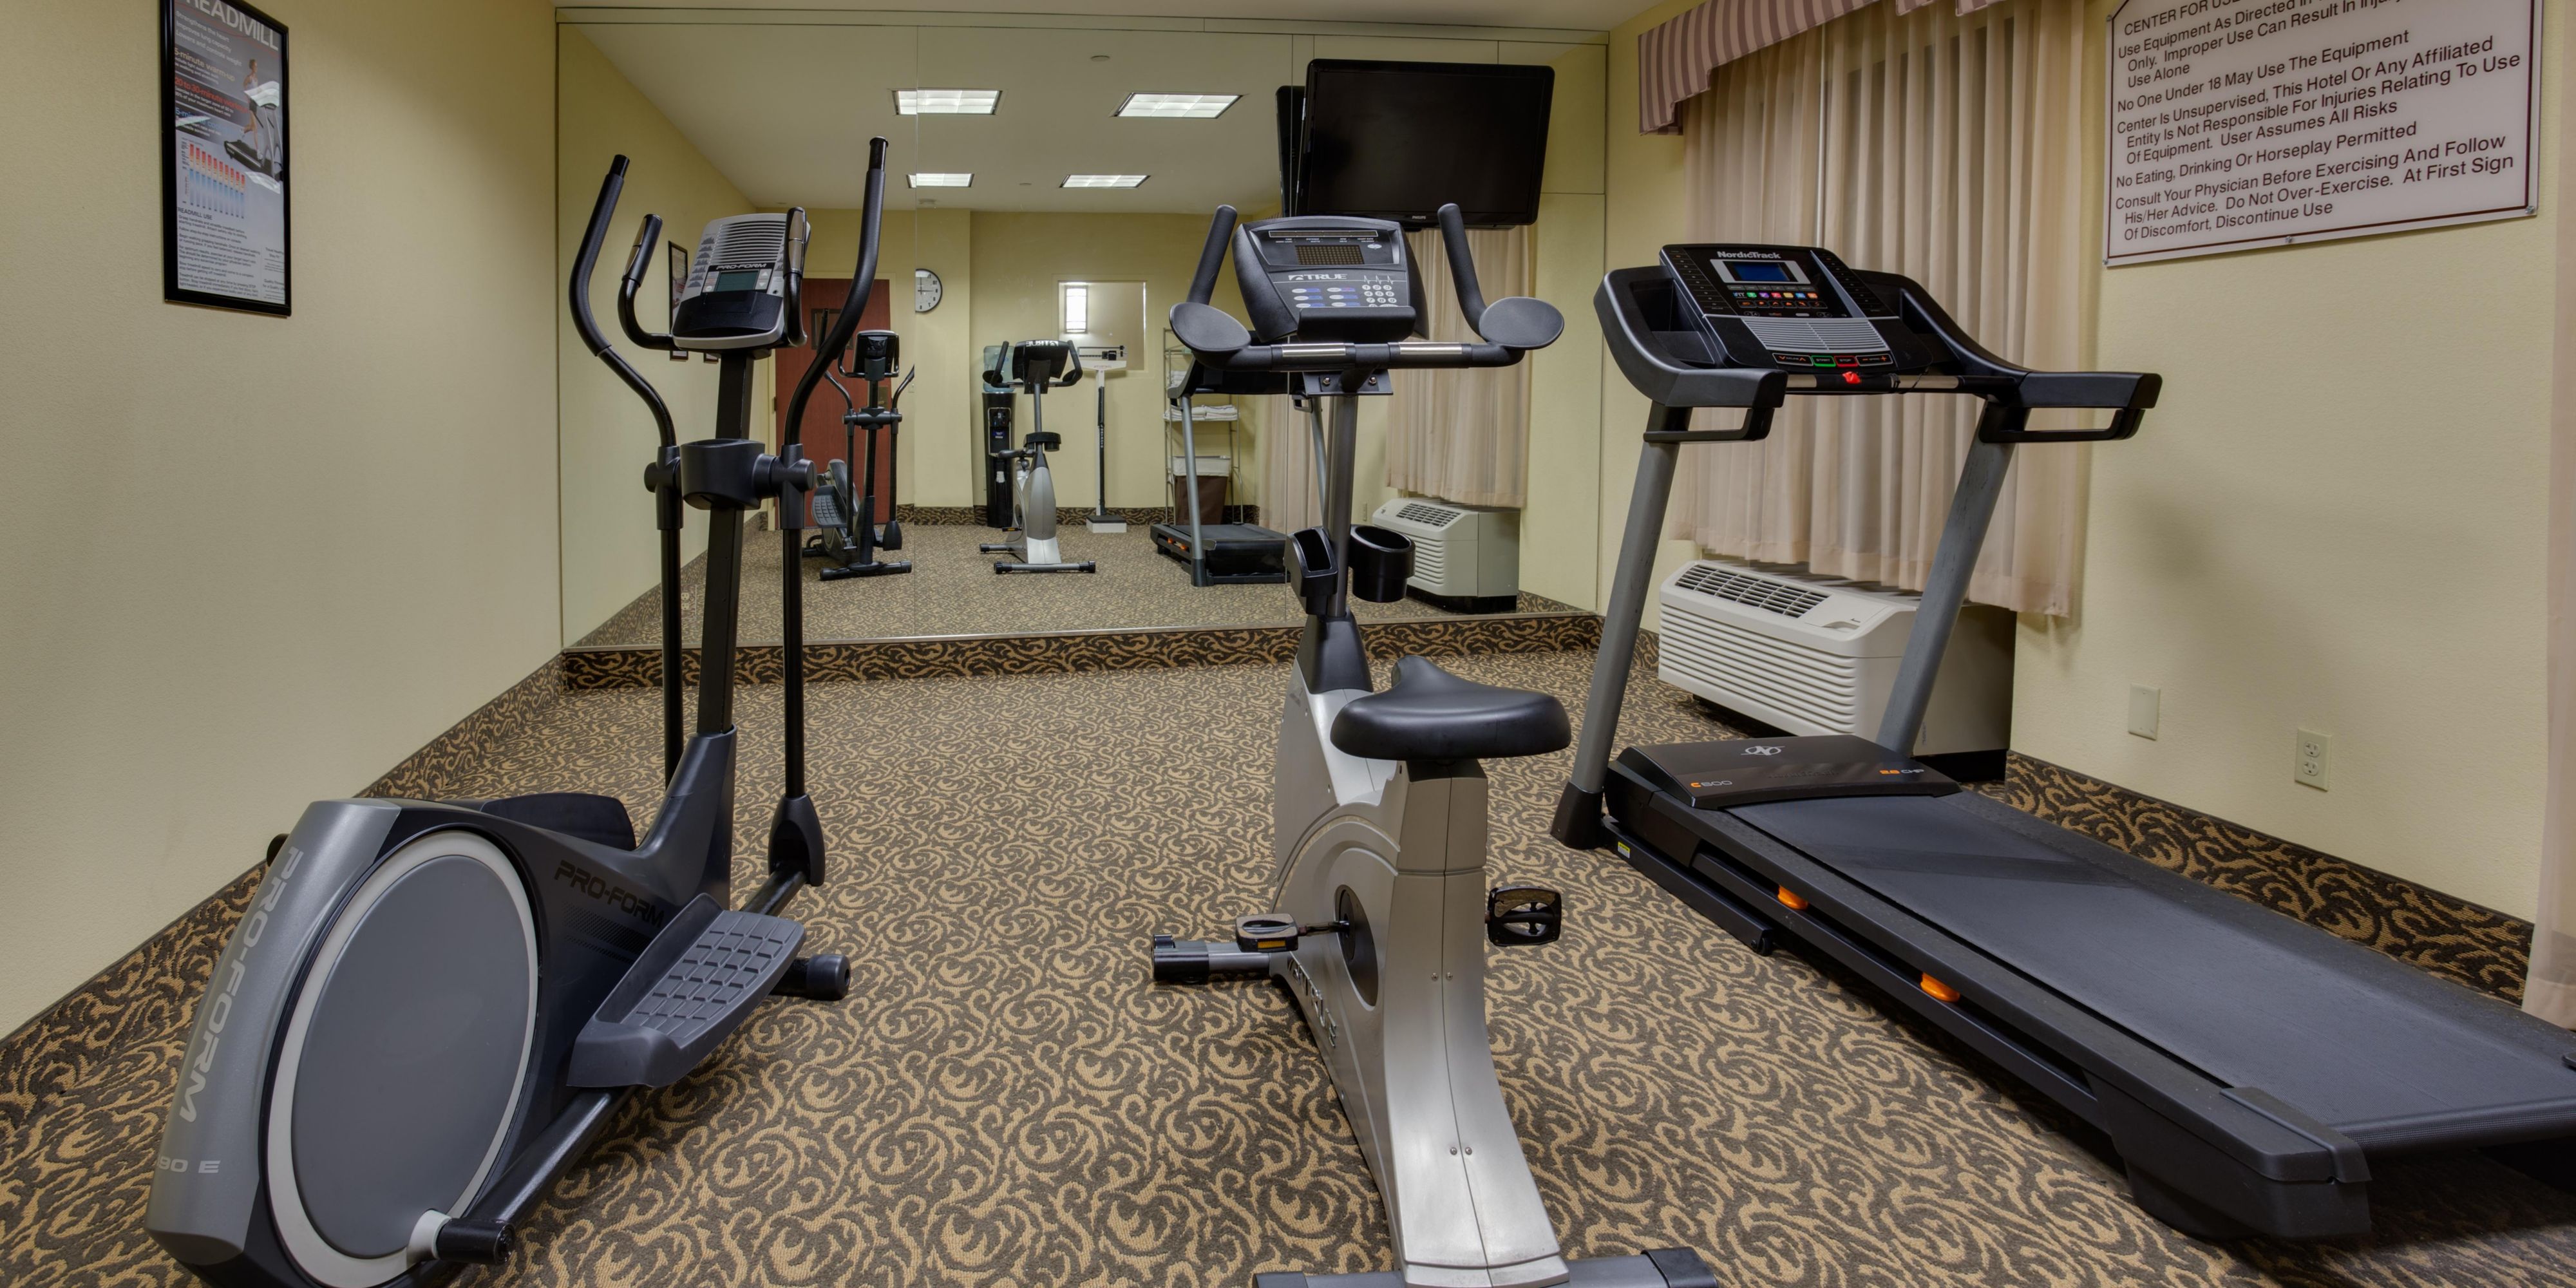 Our complimentary fitness center makes it easy for you to work out, have fun, and stay fit.